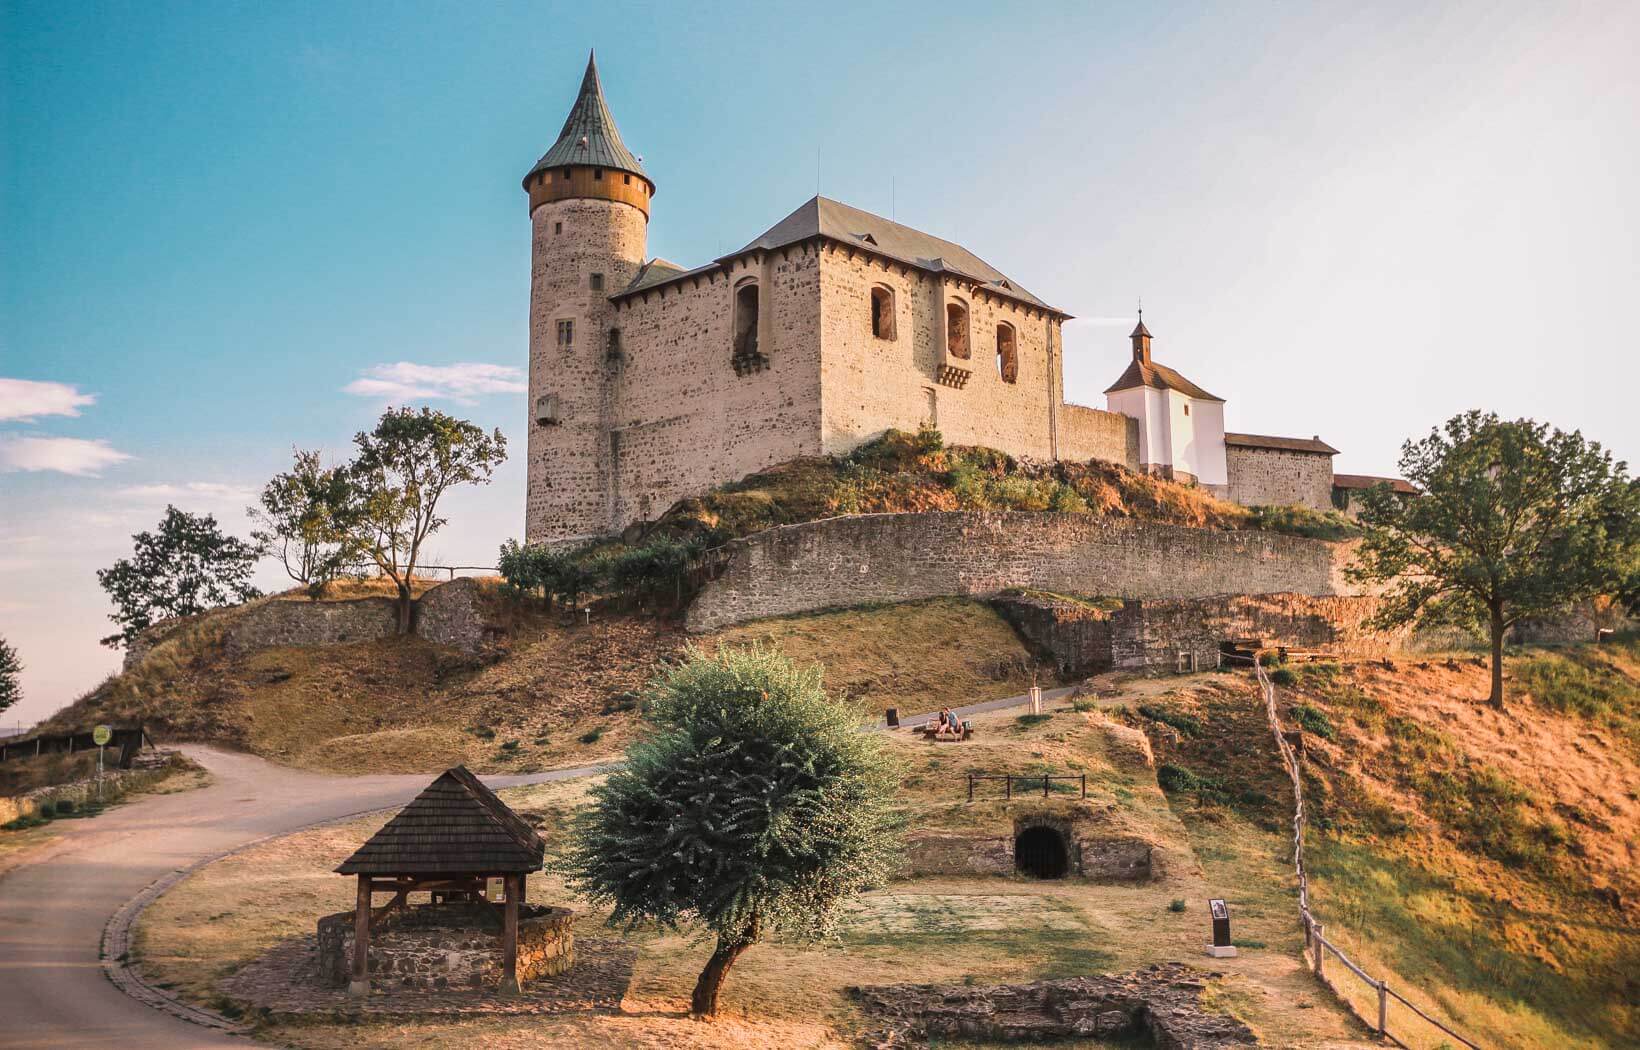 Hrad Kuneticka Hora View Fairy-Tale Castles in Czech Republic That You Didn't Know About